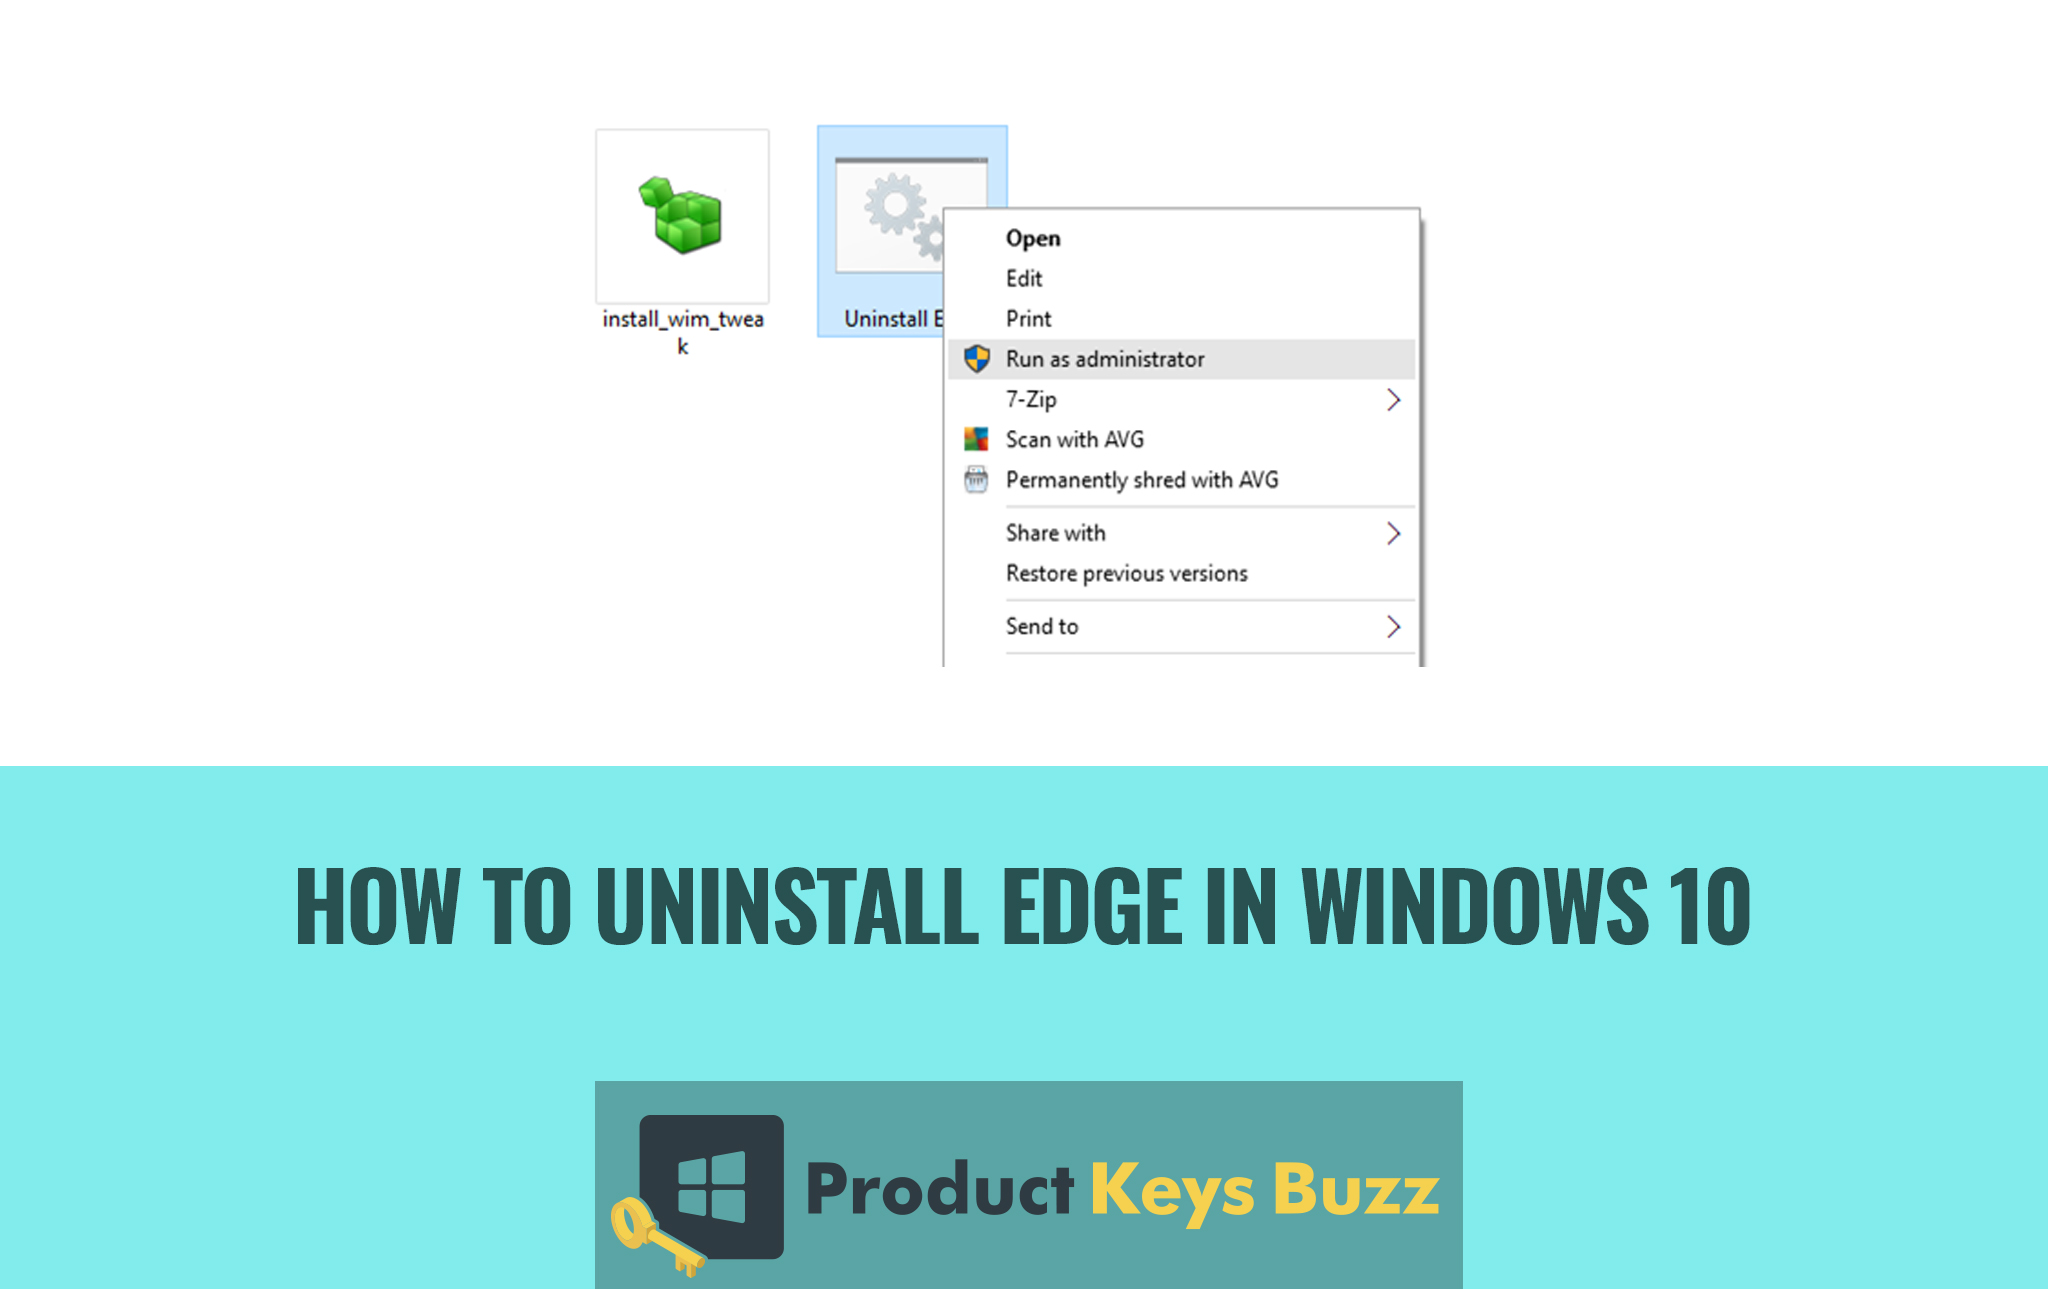 How to uninstall Edge in Windows 10